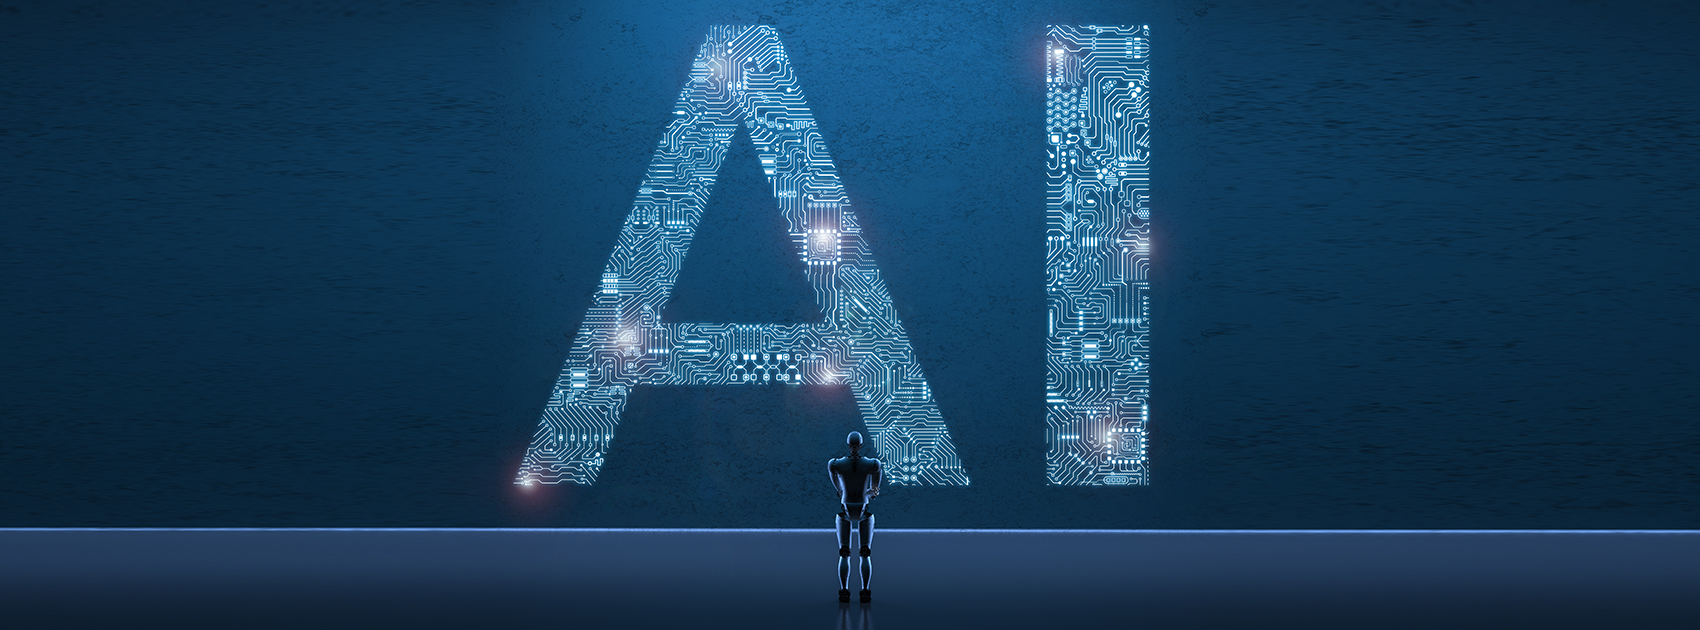 Best Artificial Intelligence Trends,Artificial Intelligence Trends 2019,Startup Stories,2019 Technology News,Current Trends in Artificial Intelligence,5 Major AI Trends of 2019,Five Best Artificial Intelligence Trends,Top AI Trends 2019,AI Trends 2019,5 Best Trends of AI in 2019